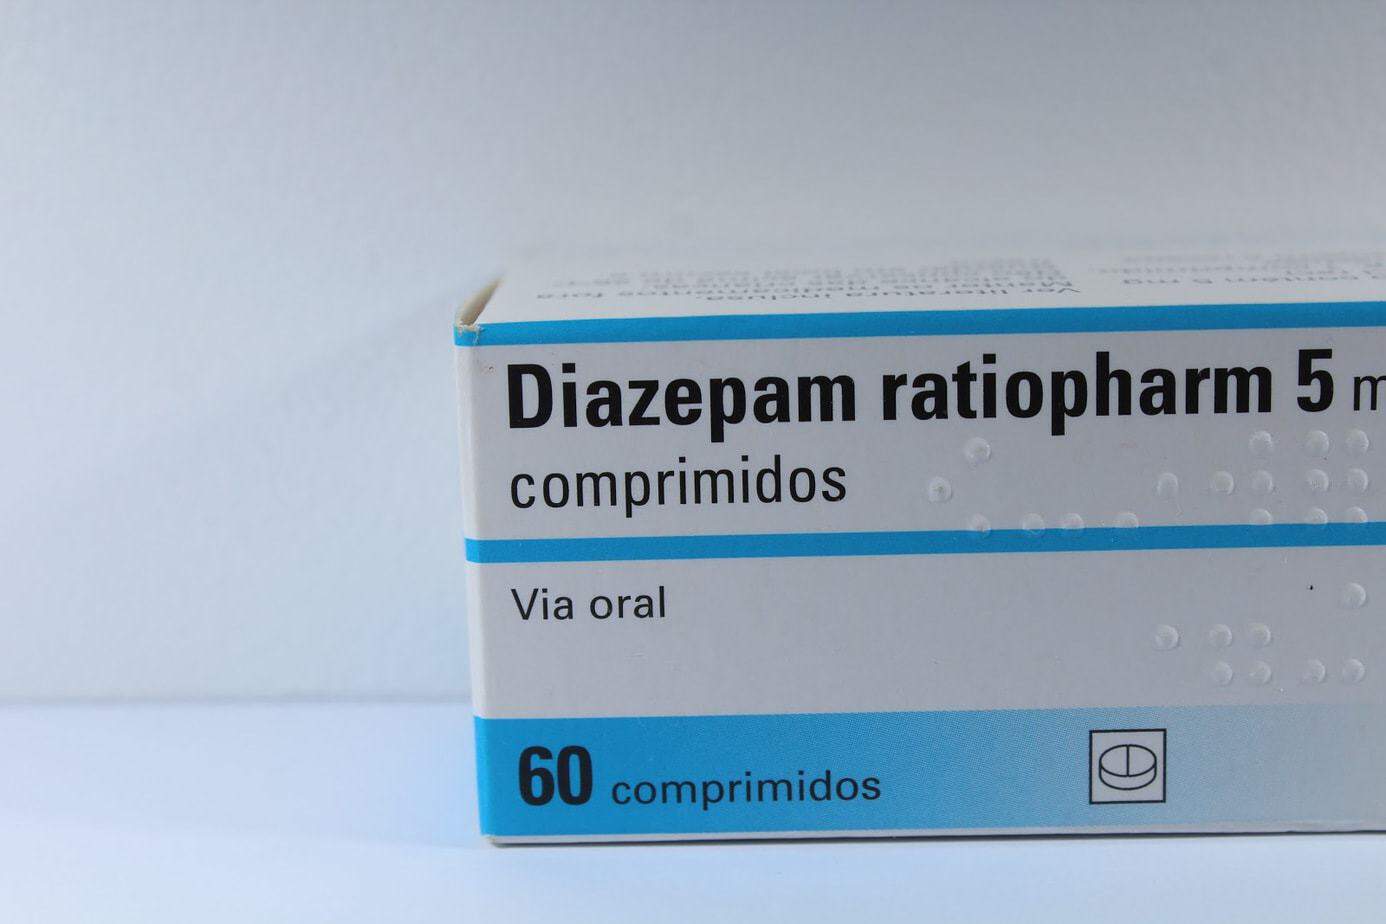 Me tome 10 diazepam